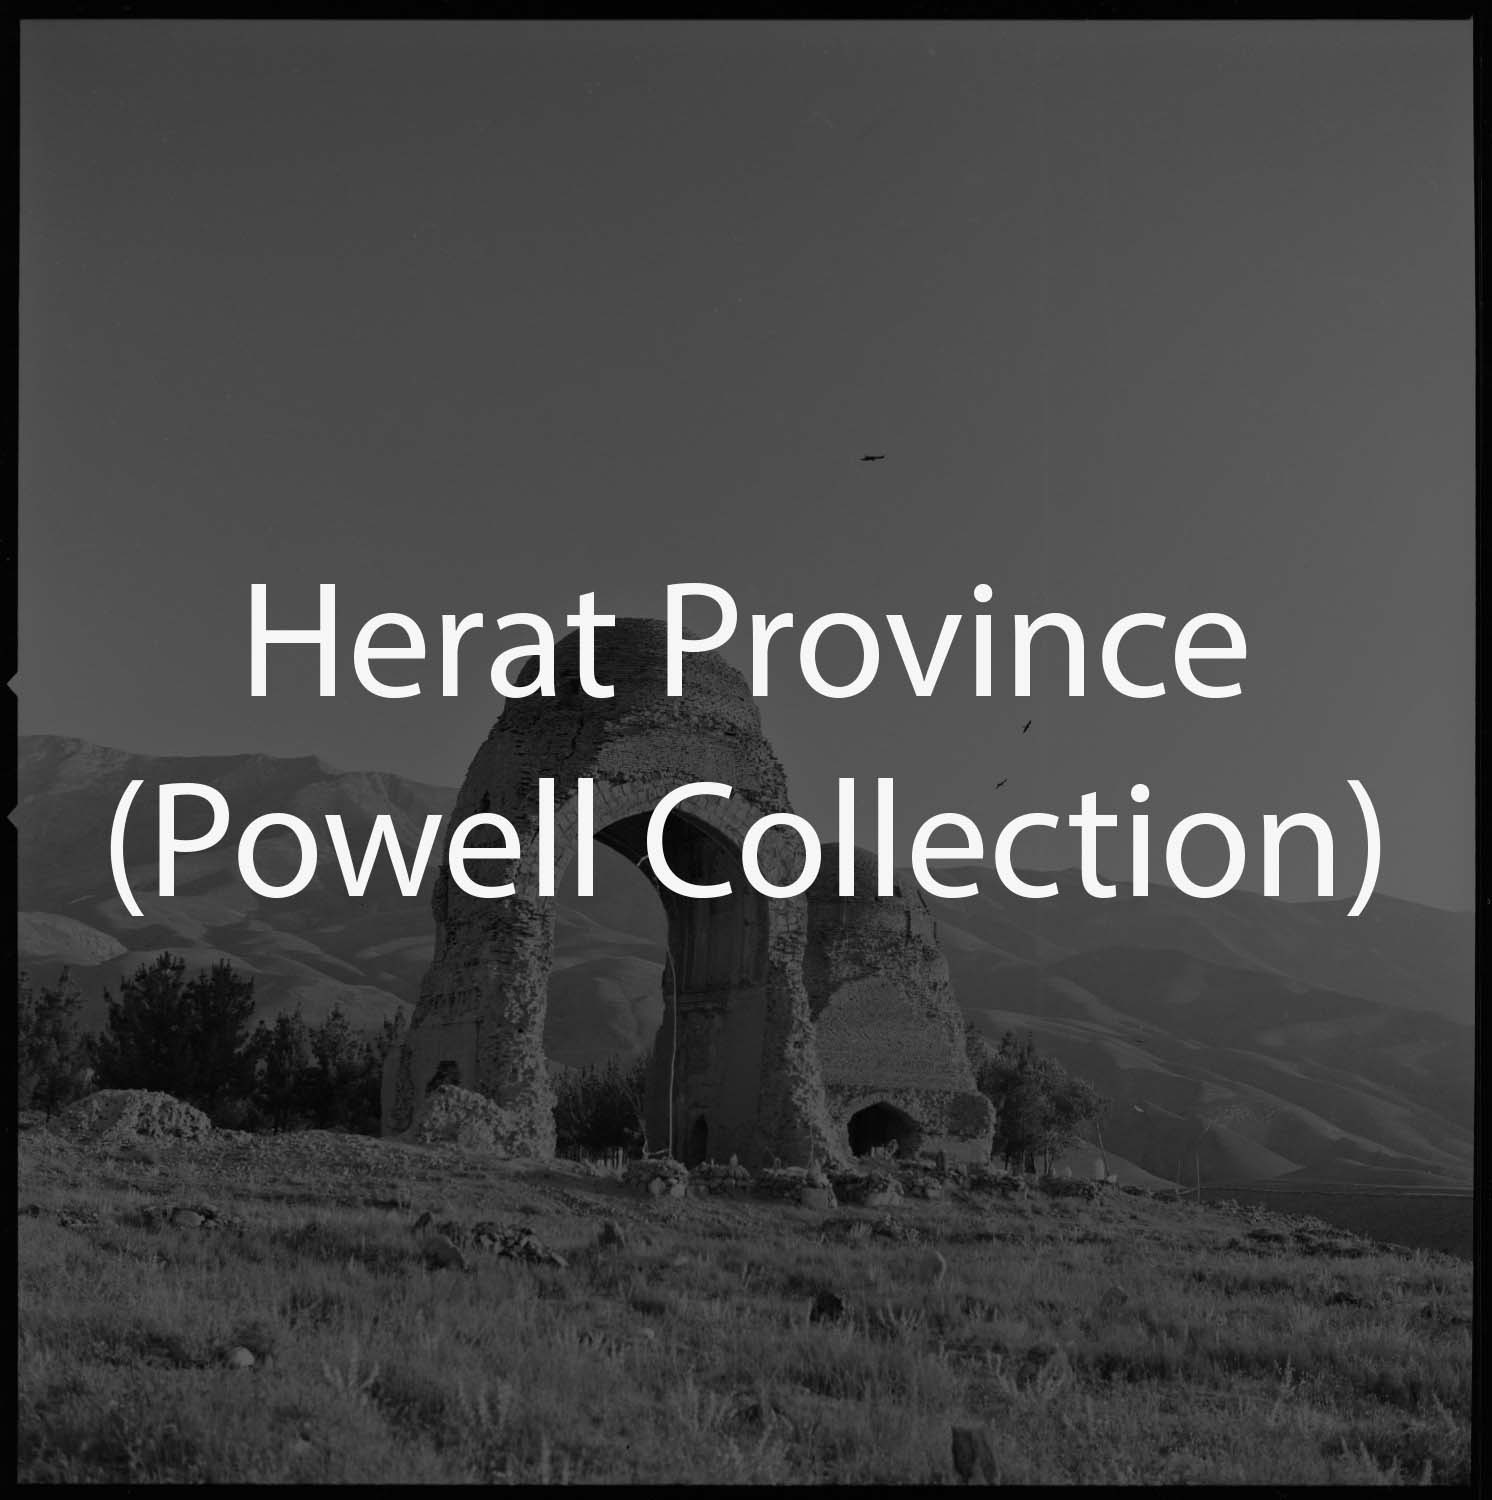 Herat Province (Powell Collection)